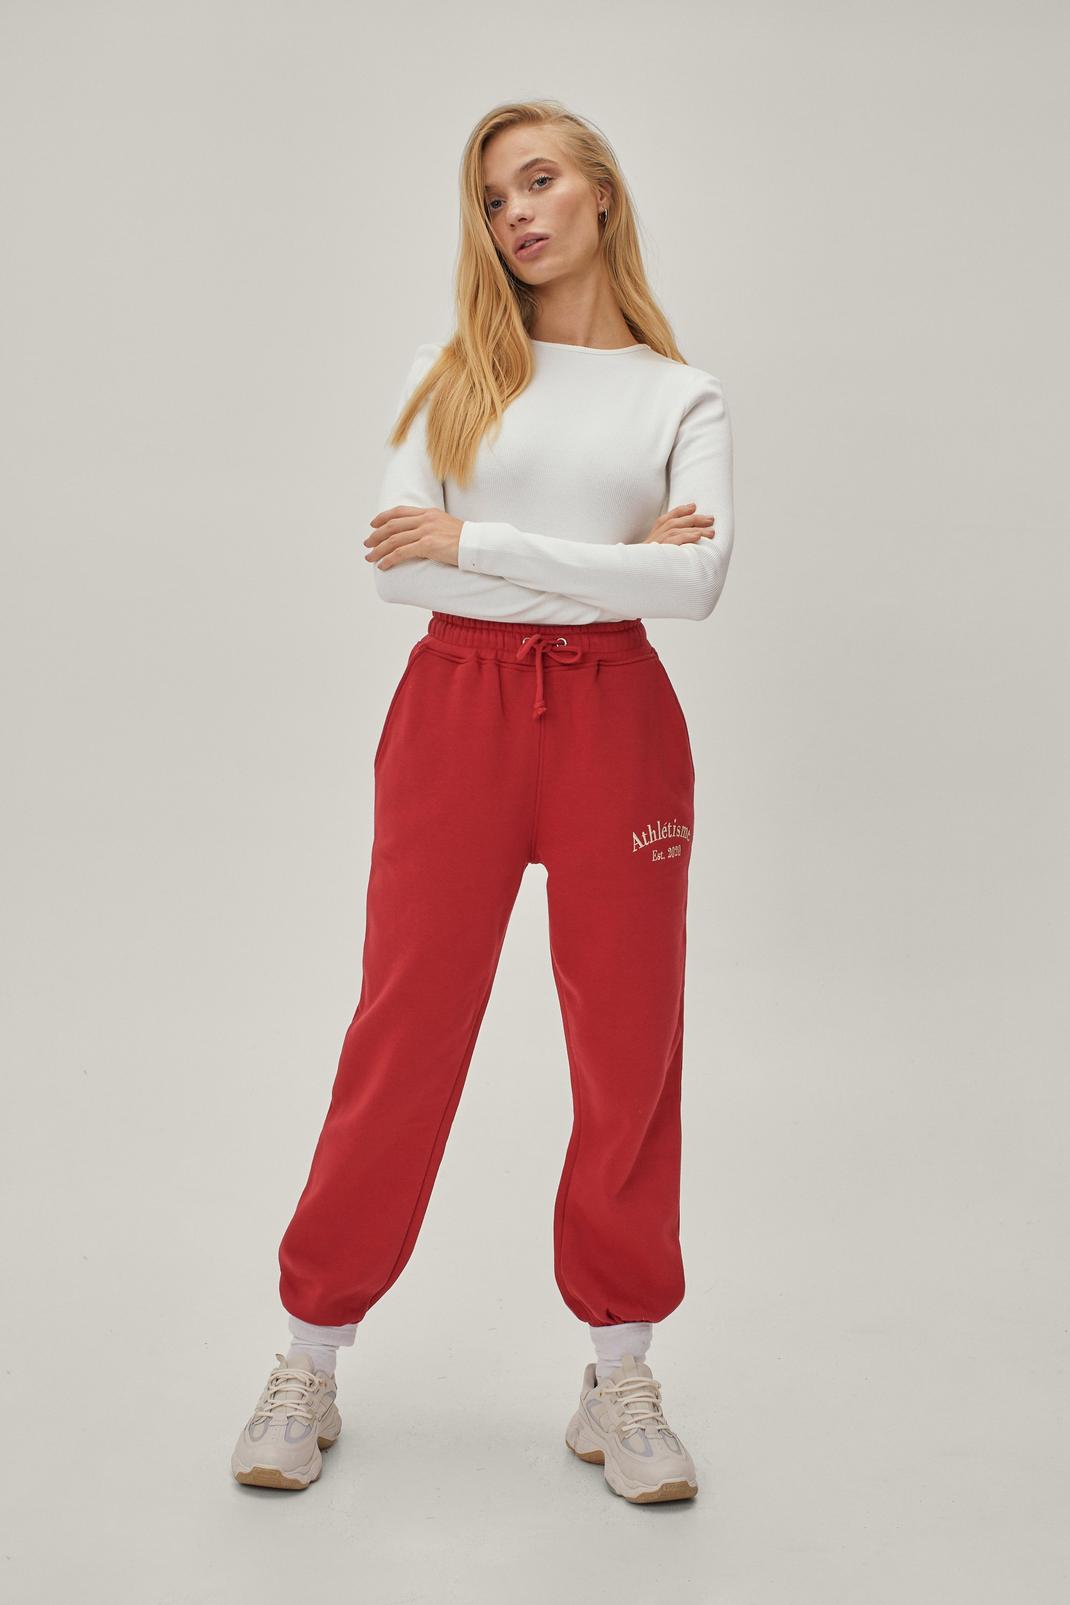 Petite Athleisure Relaxed Fit Sweatpants